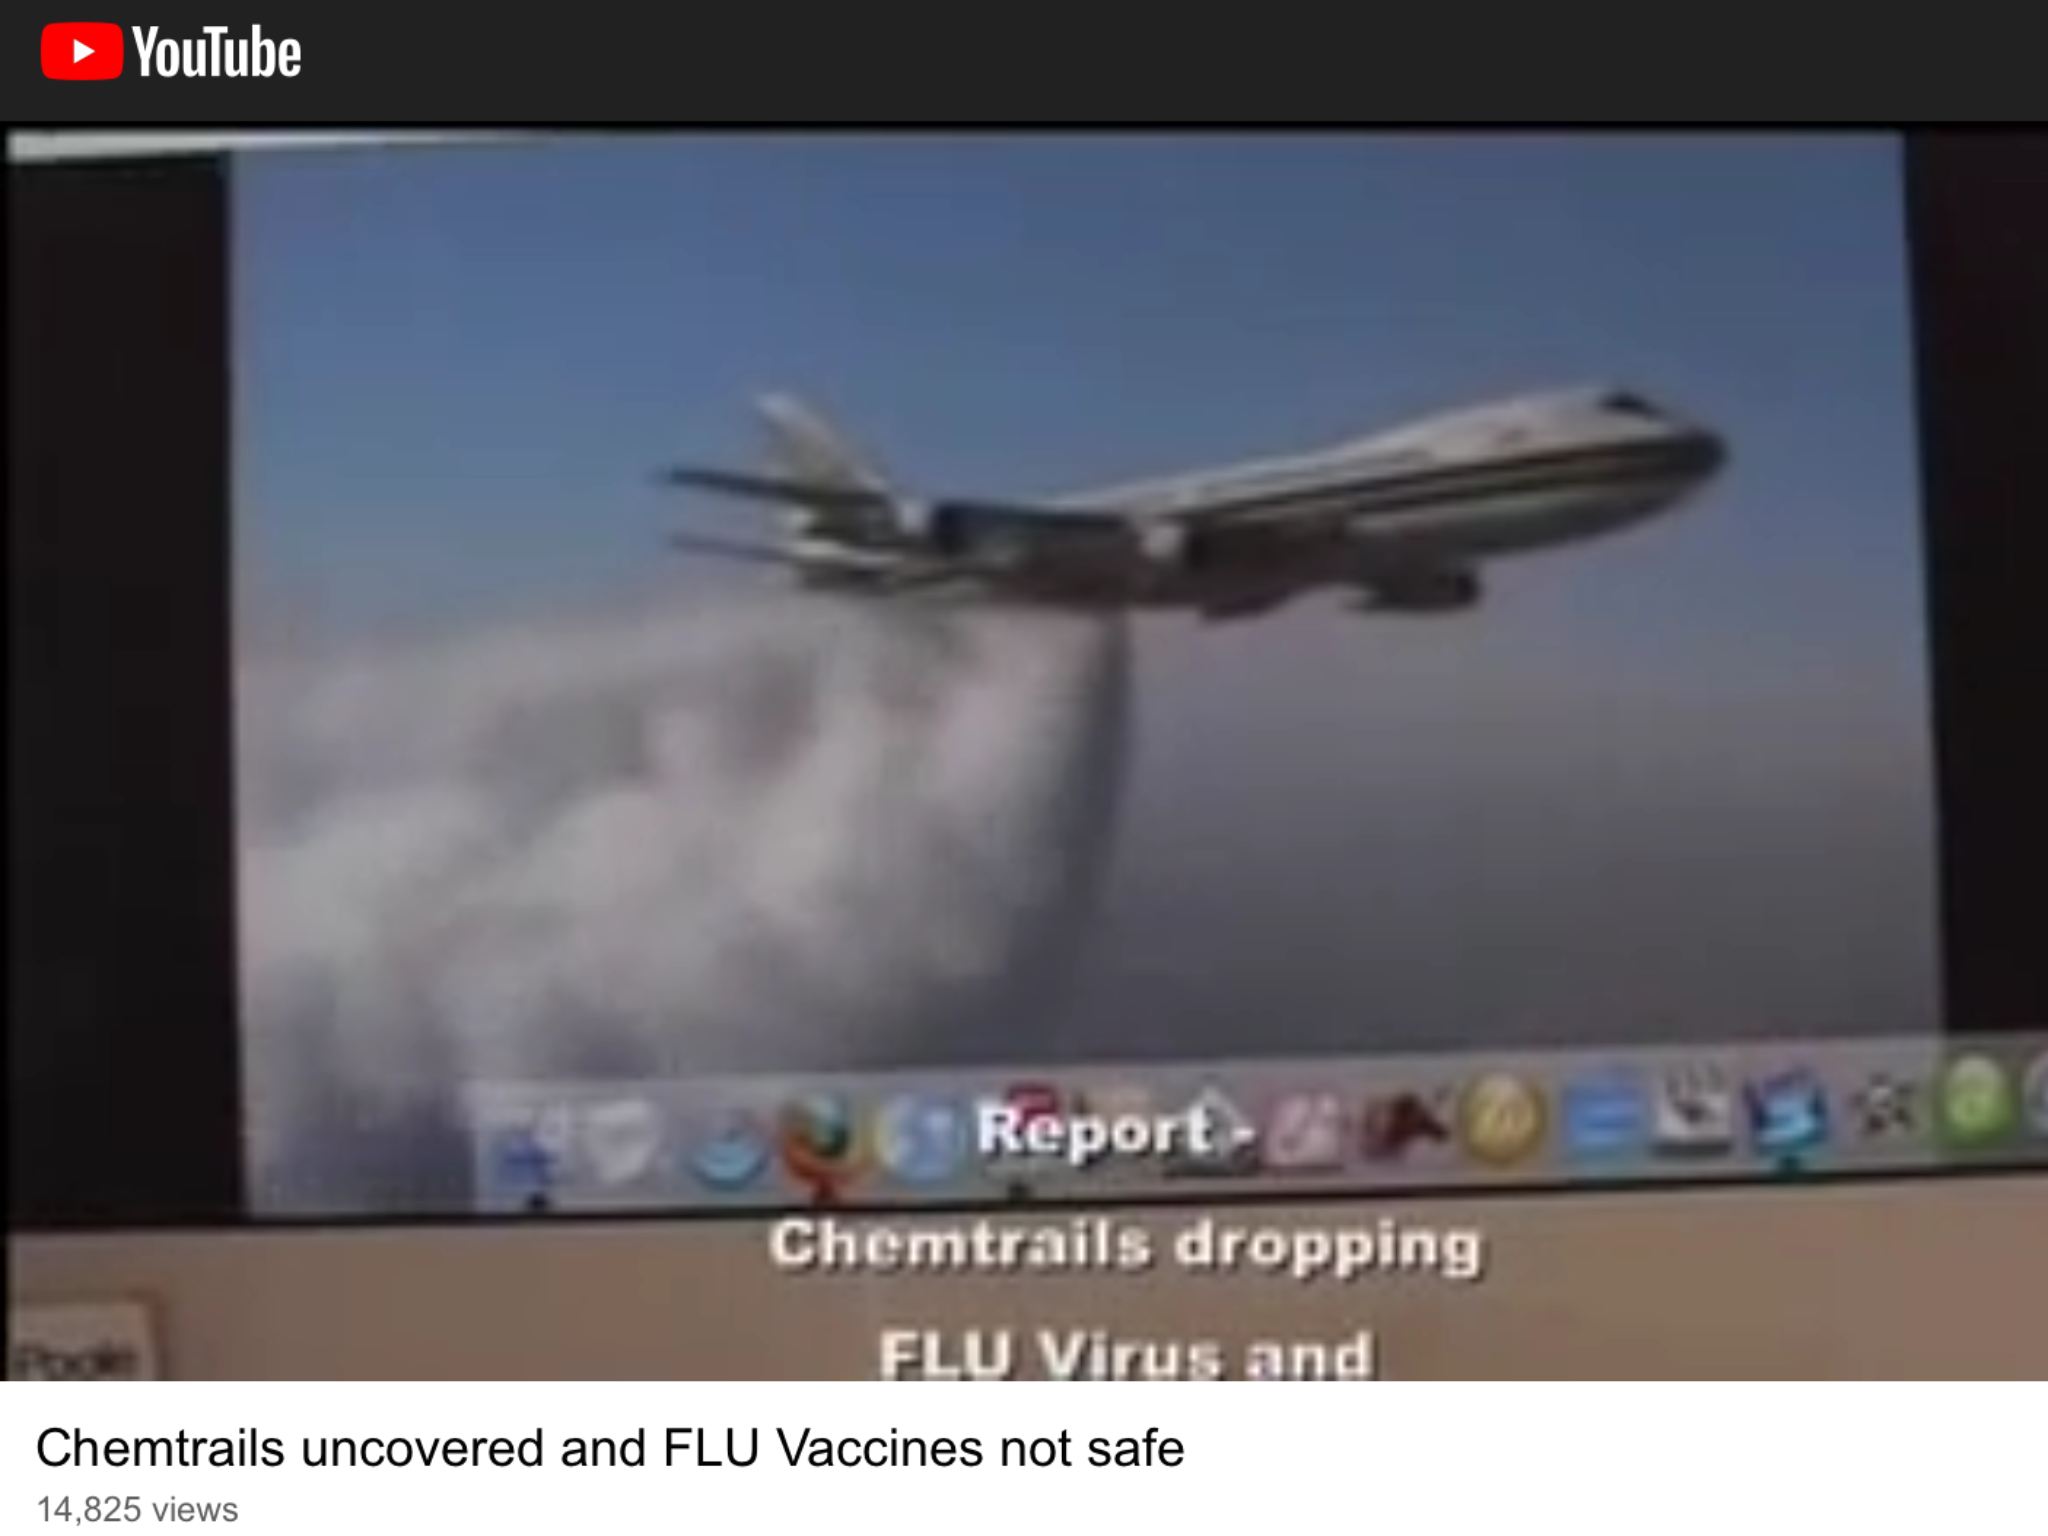 Virus also known as Chemtrails